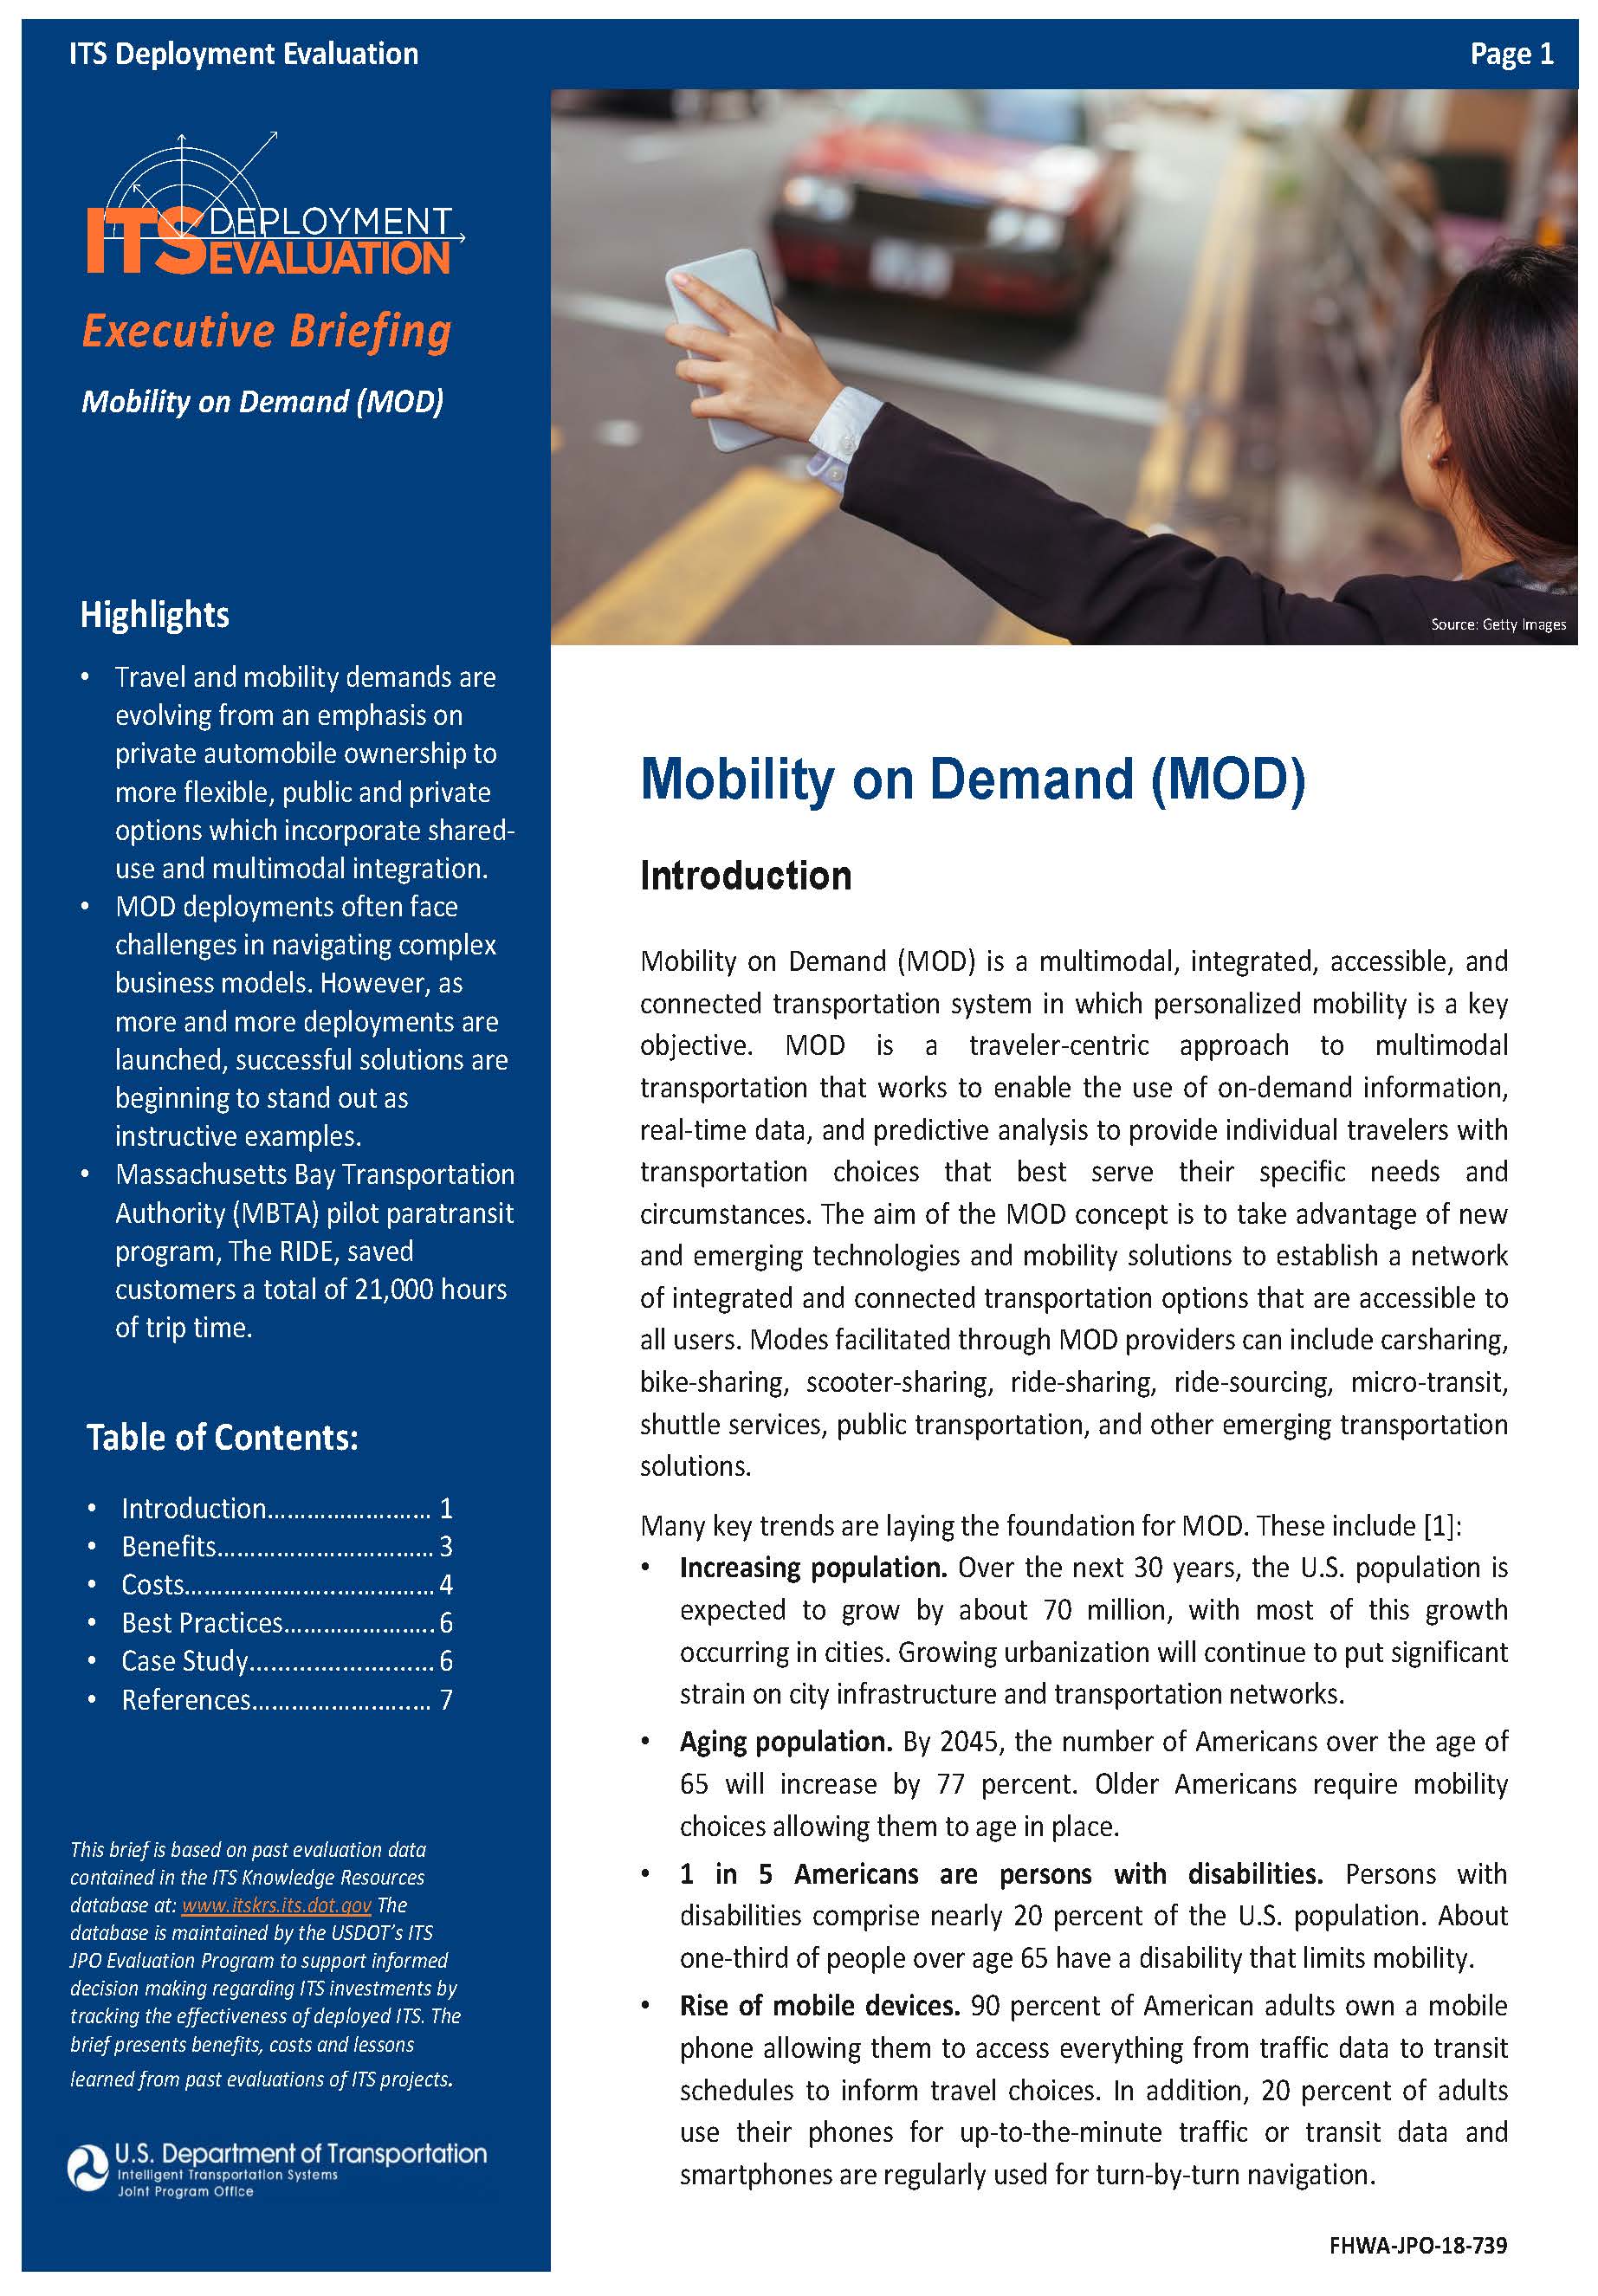 Cover Page of the Mobility on Demand Executive Briefing